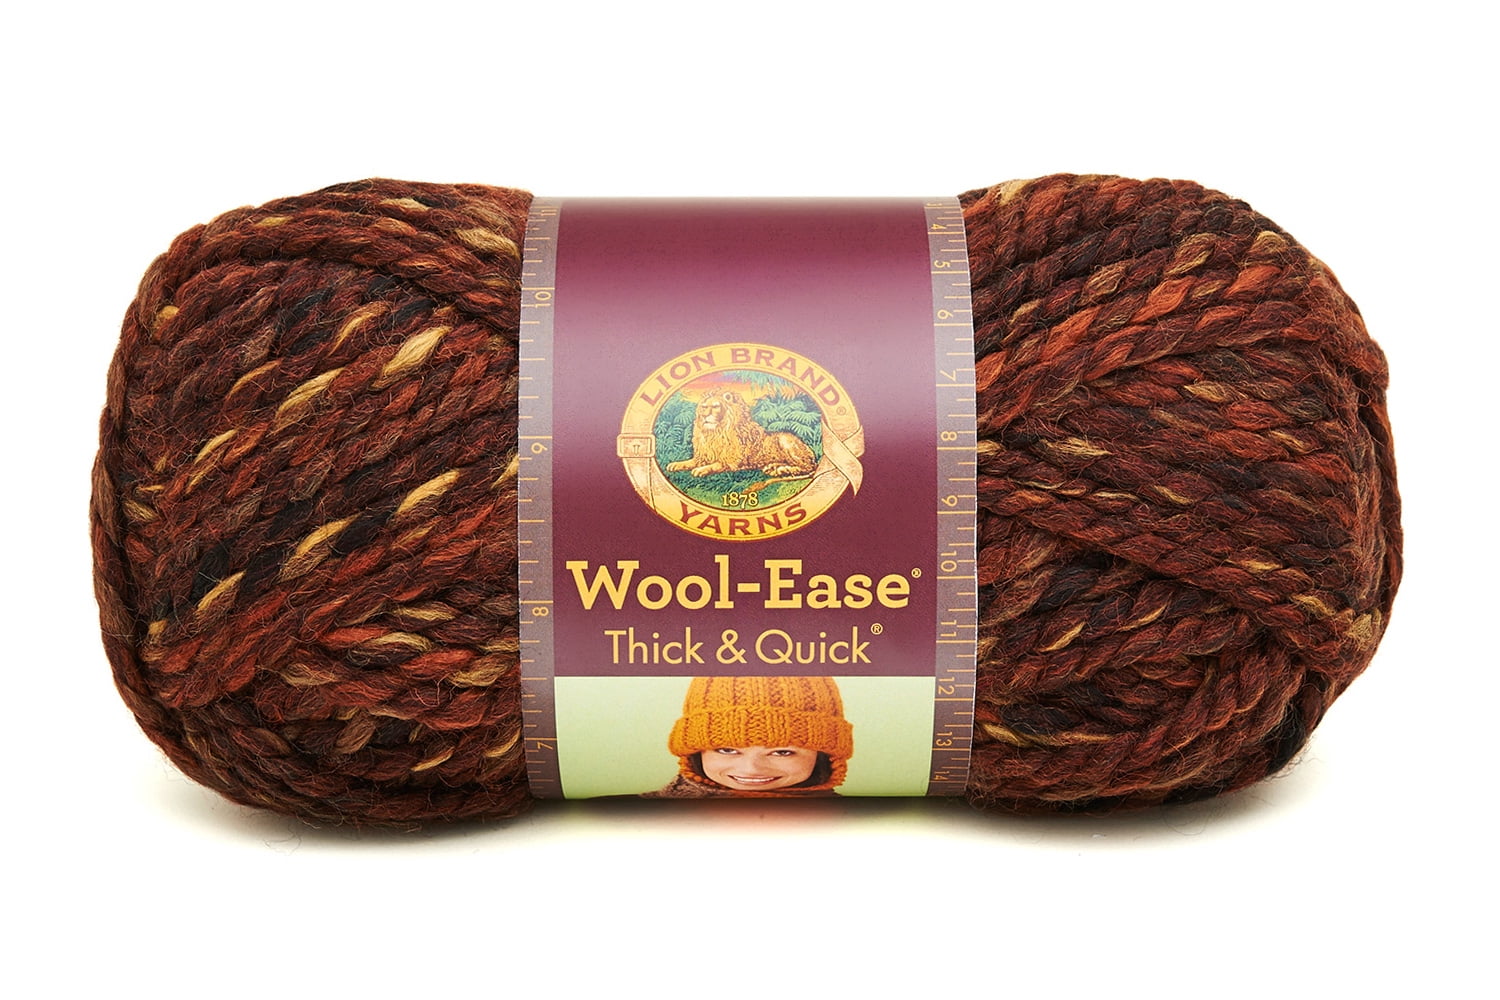 Lion Brand Wool-Ease Thick & Quick Yarn-Harvest, 1 count - Kroger